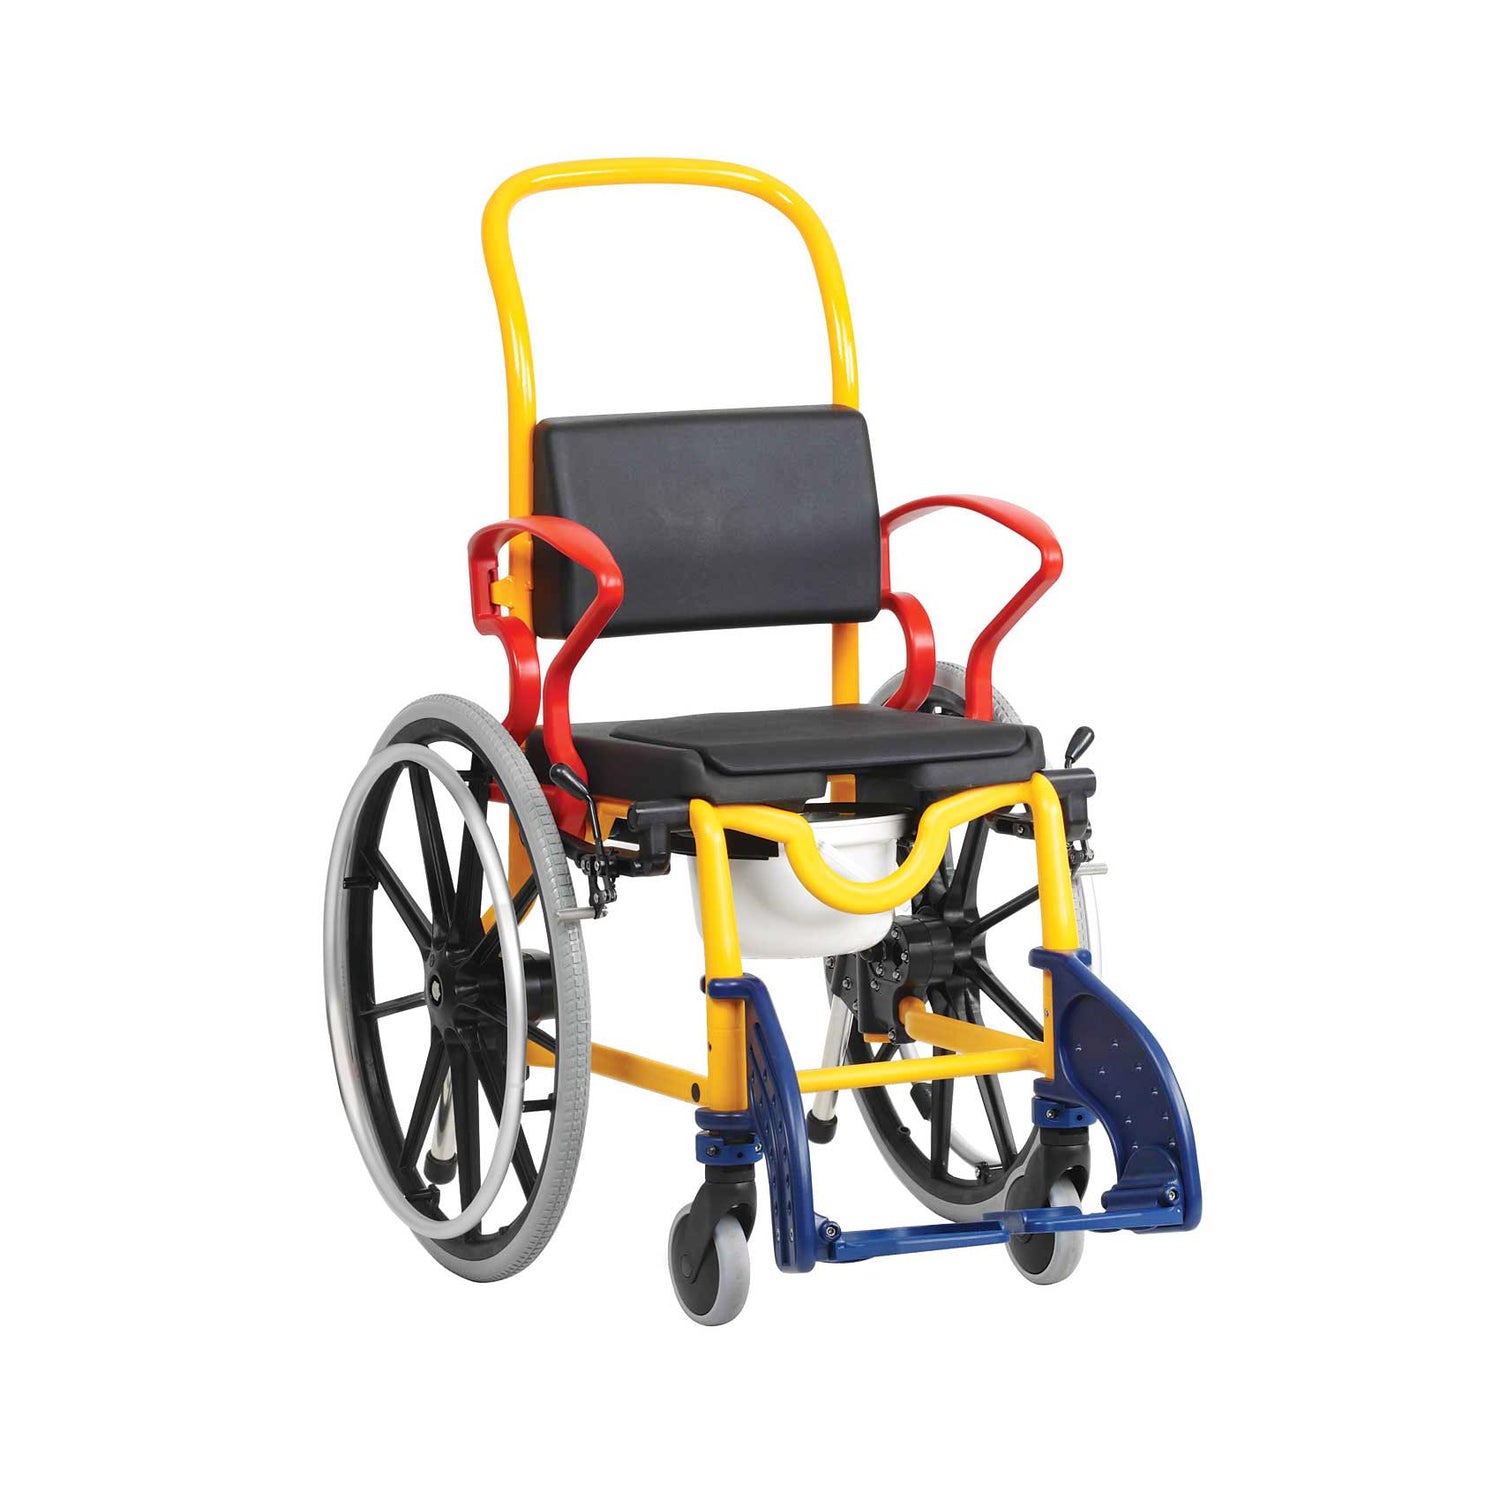 Rebotec Augsburg 24 - Self Propelled Child Commode Wheelchair